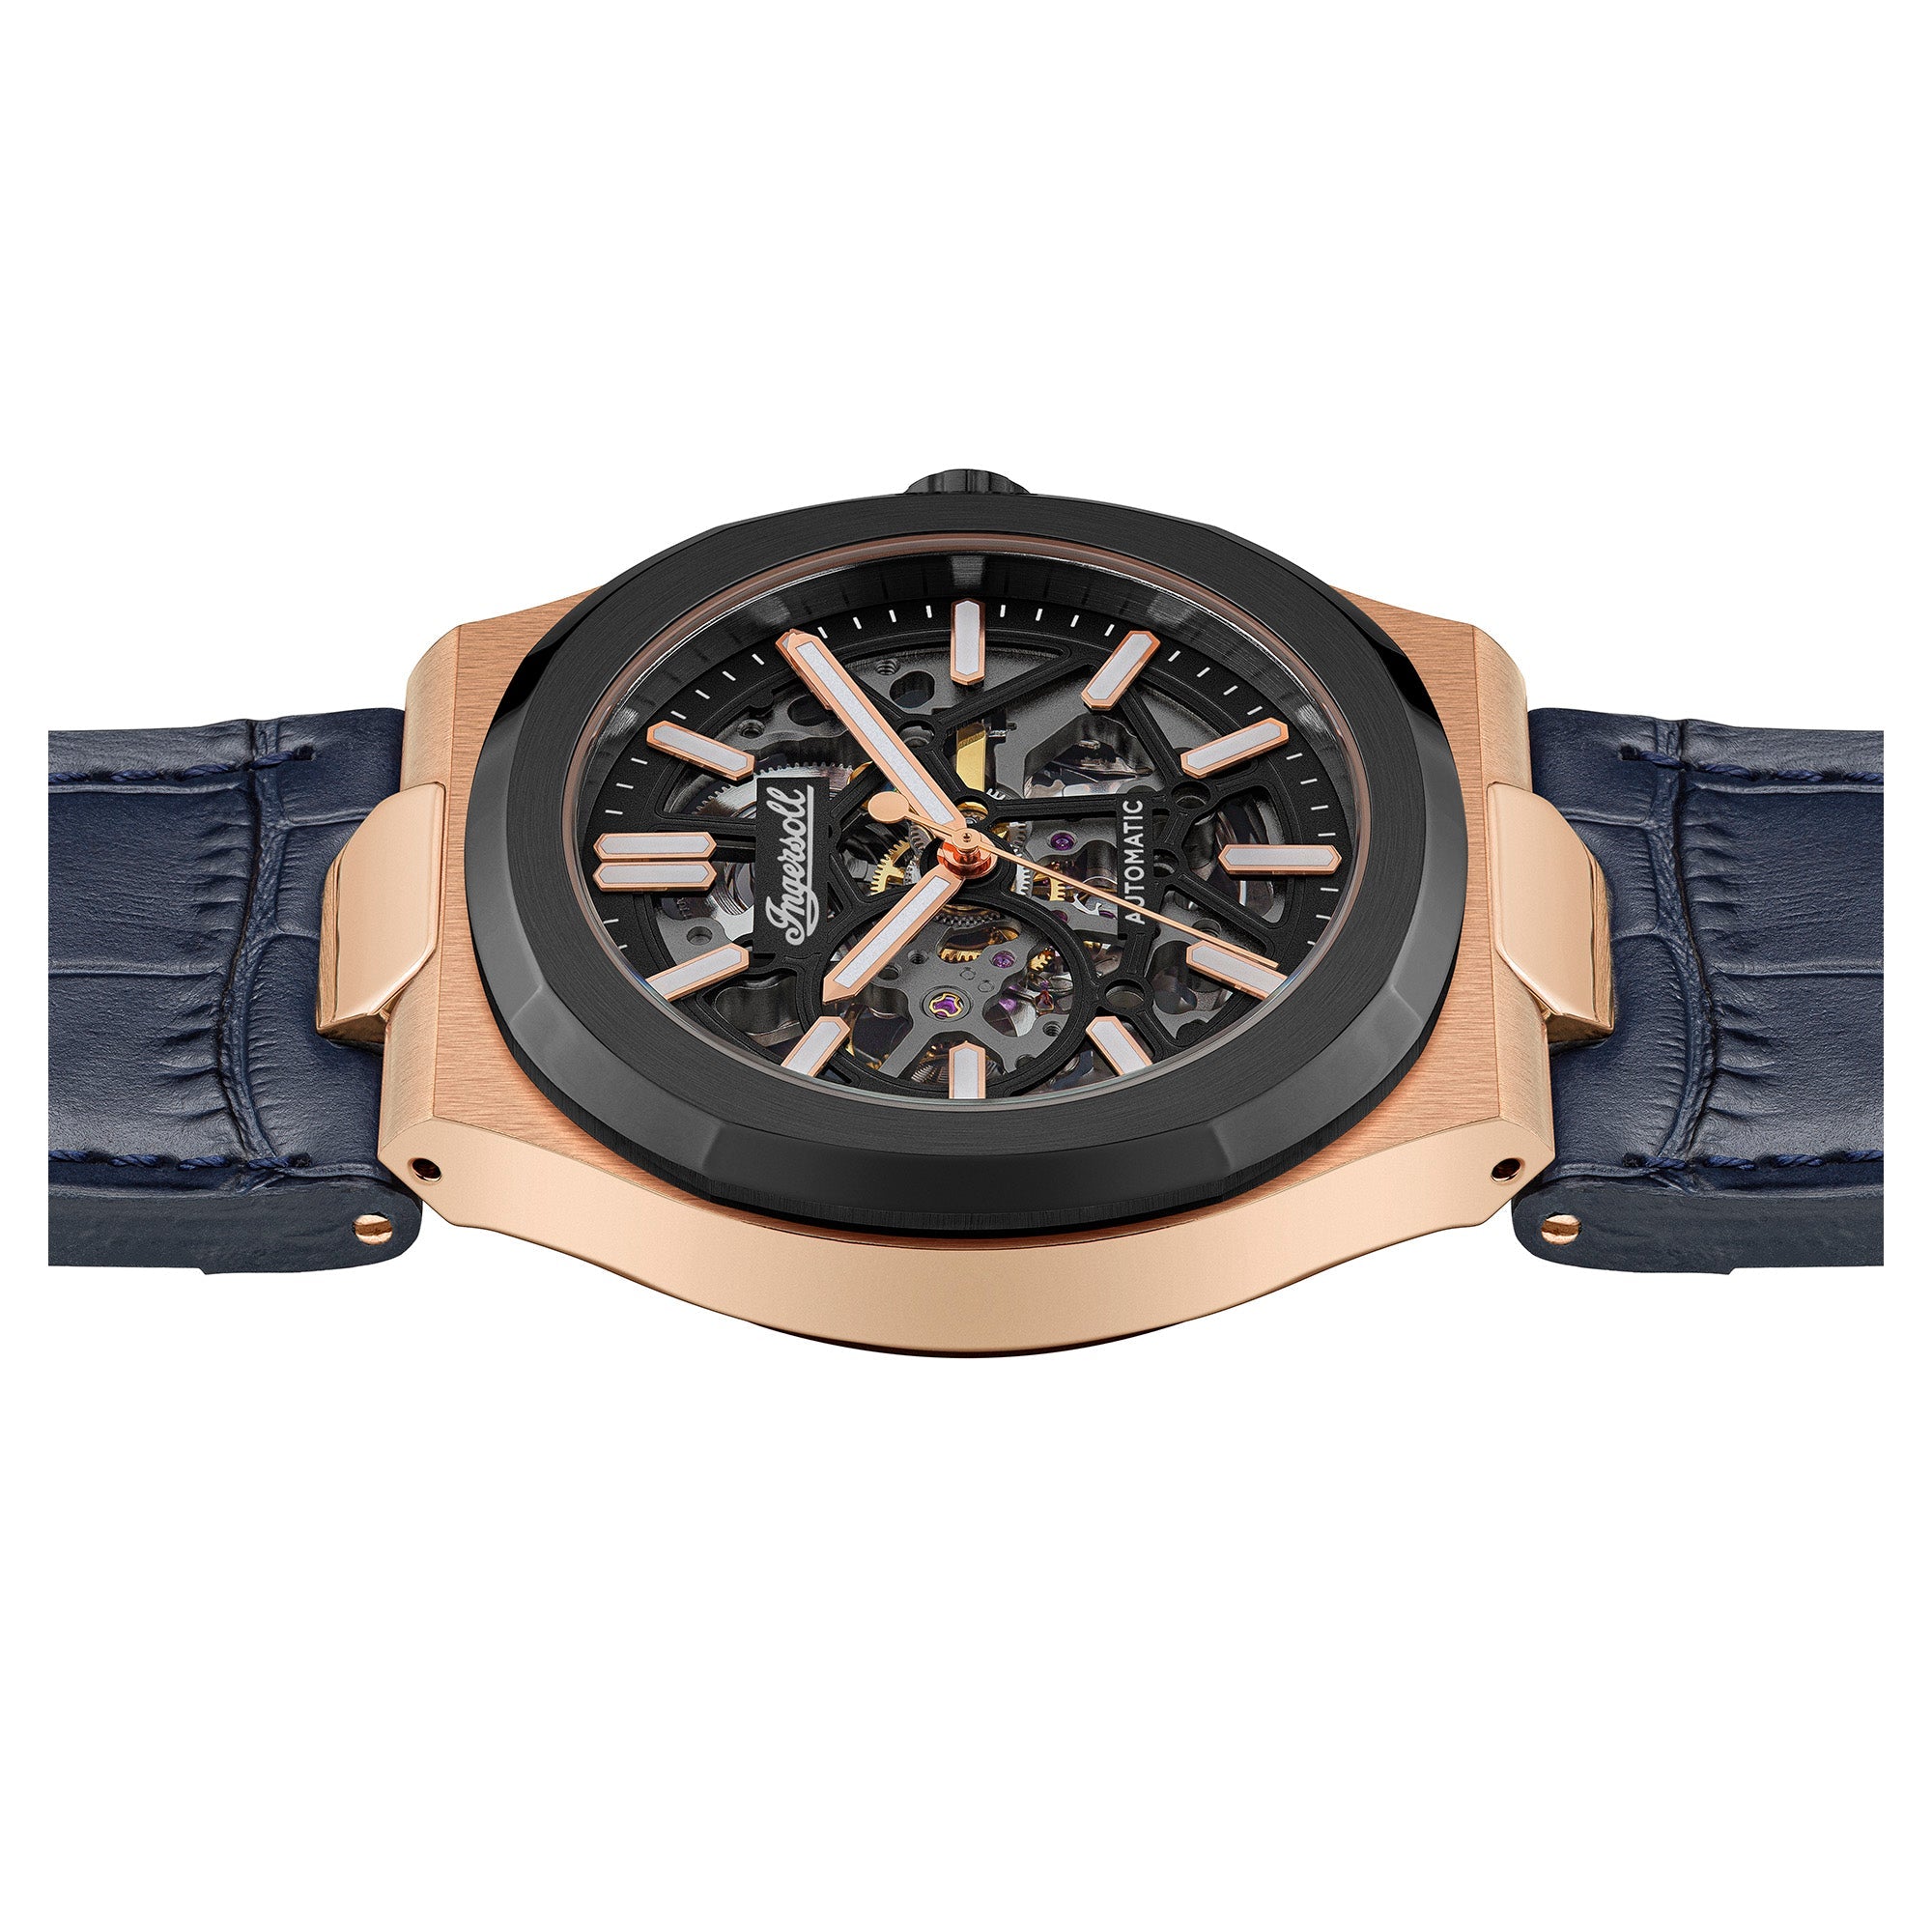 The Catalina Rose Gold Blue Watch